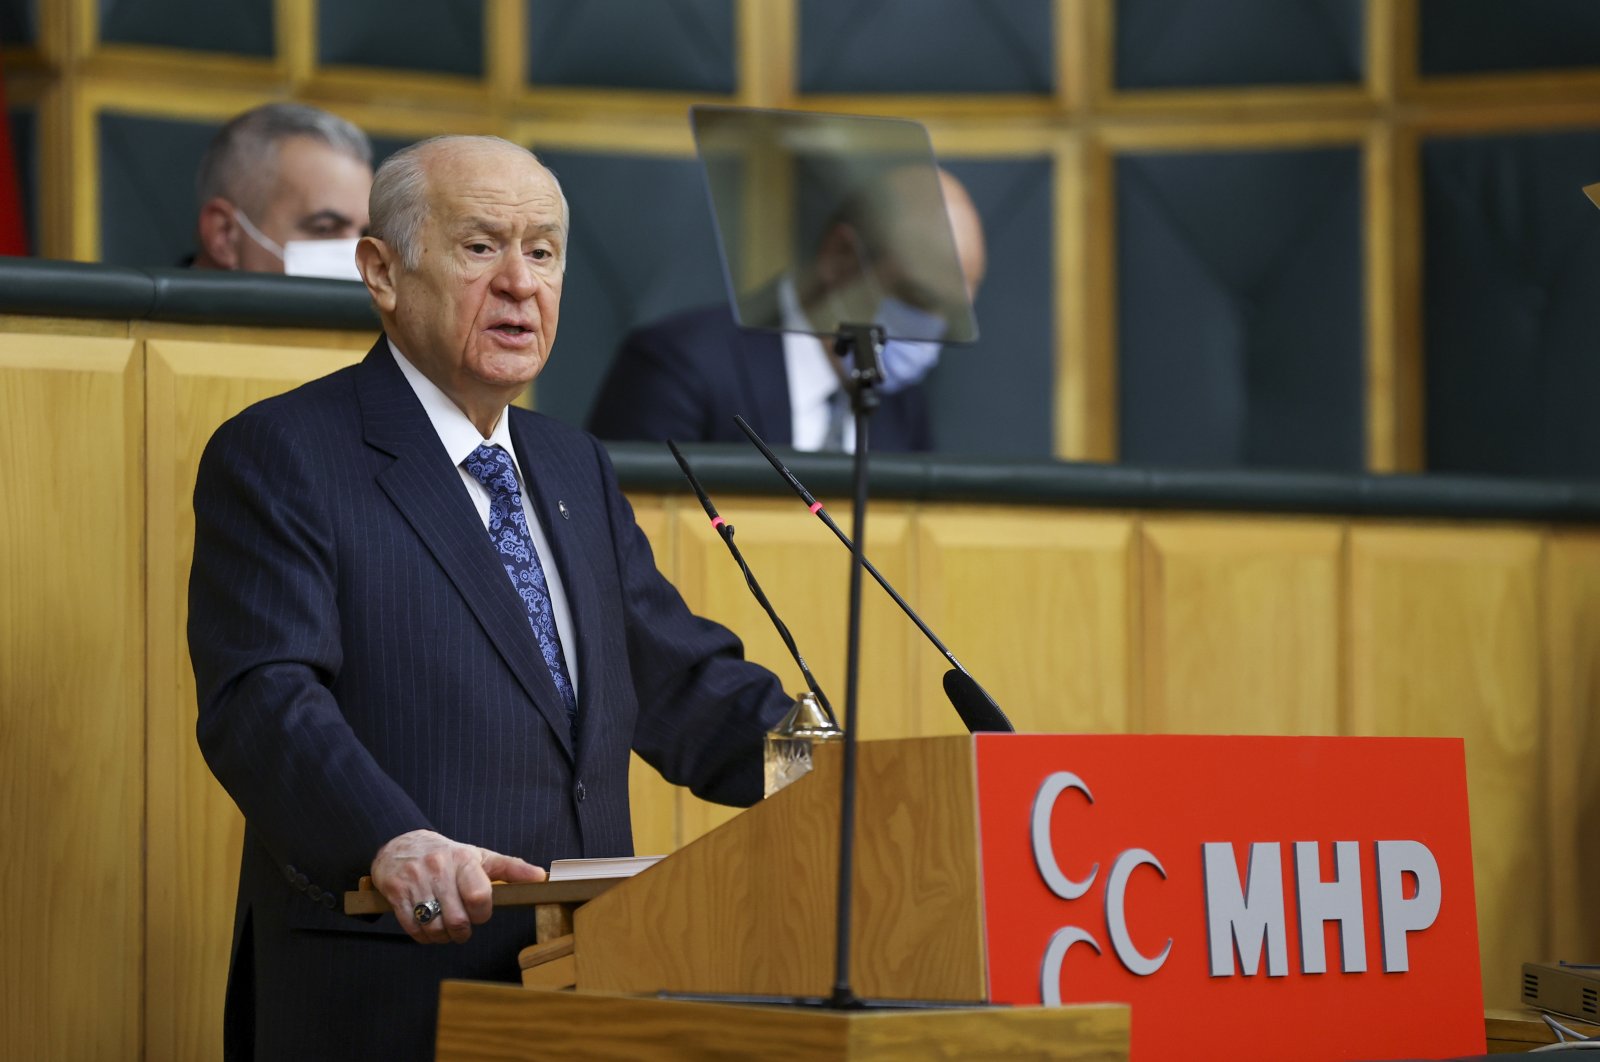 MHP Chairperson Devlet Bahçeli speaks at his party's parliamentary group meeting in Ankara, Feb. 26, 2021 (AA File Photo)